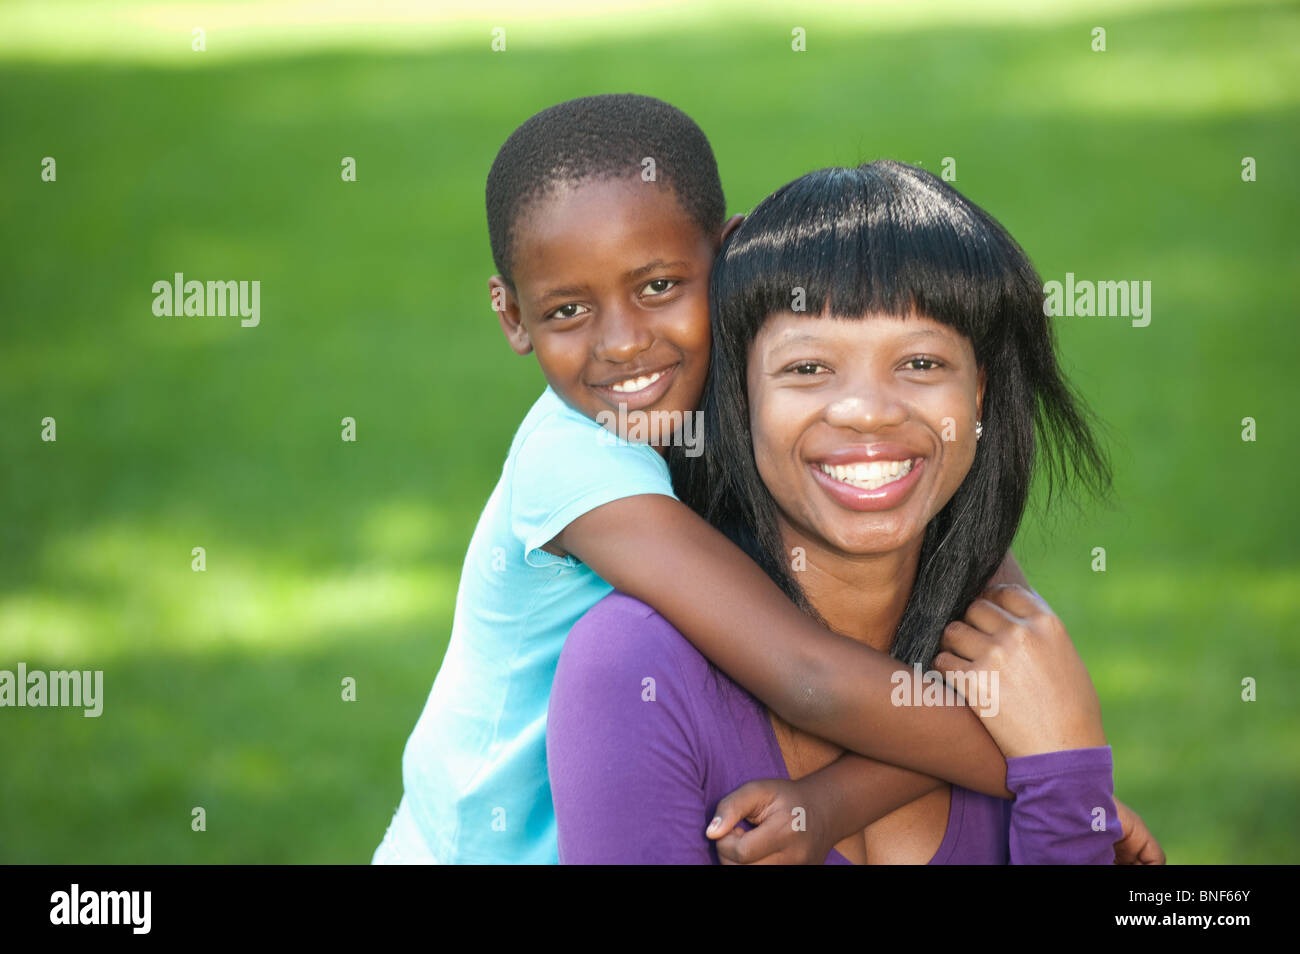 Portrait of girl (8-9) embracing mother, outdoors, Johannesburg, Gauteng Province, South Africa Stock Photo